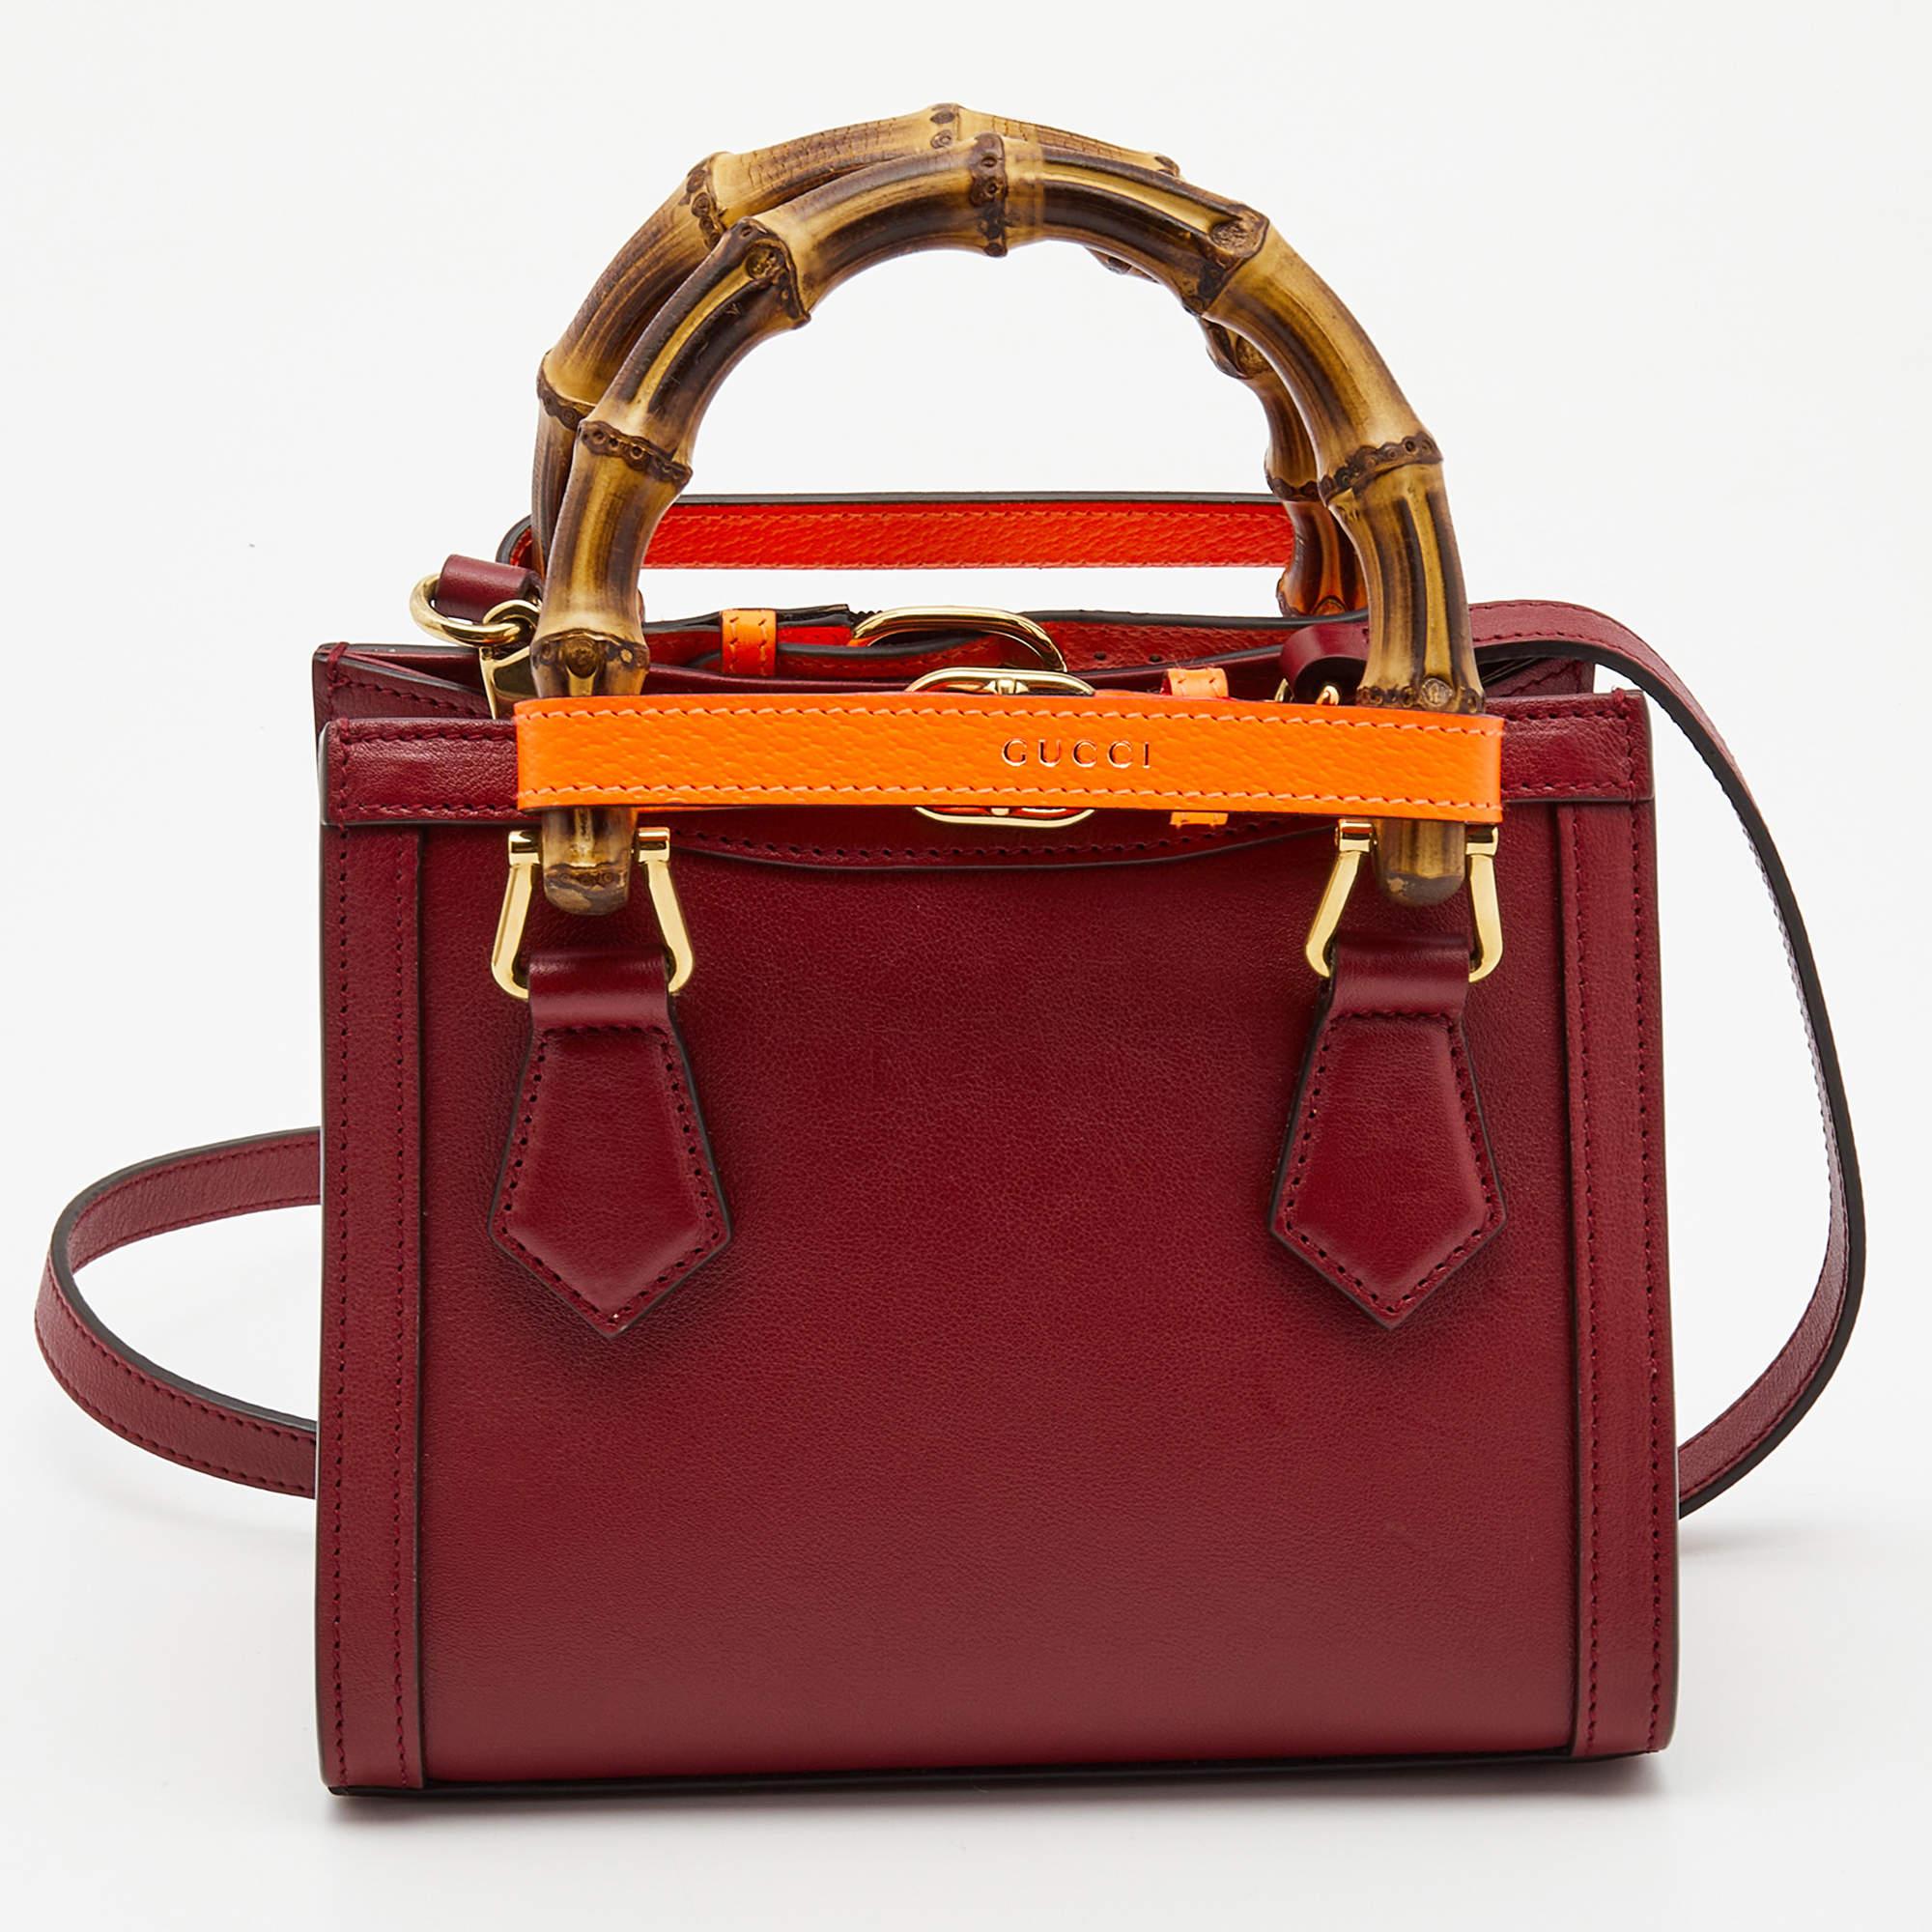 You are going to love owning this mini Diana tote from Gucci as it is well-made and brimming with luxury. The Diana tote has been crafted from leather and lined with Alcantara on the insides. It has a red hue and two bamboo handles along with a